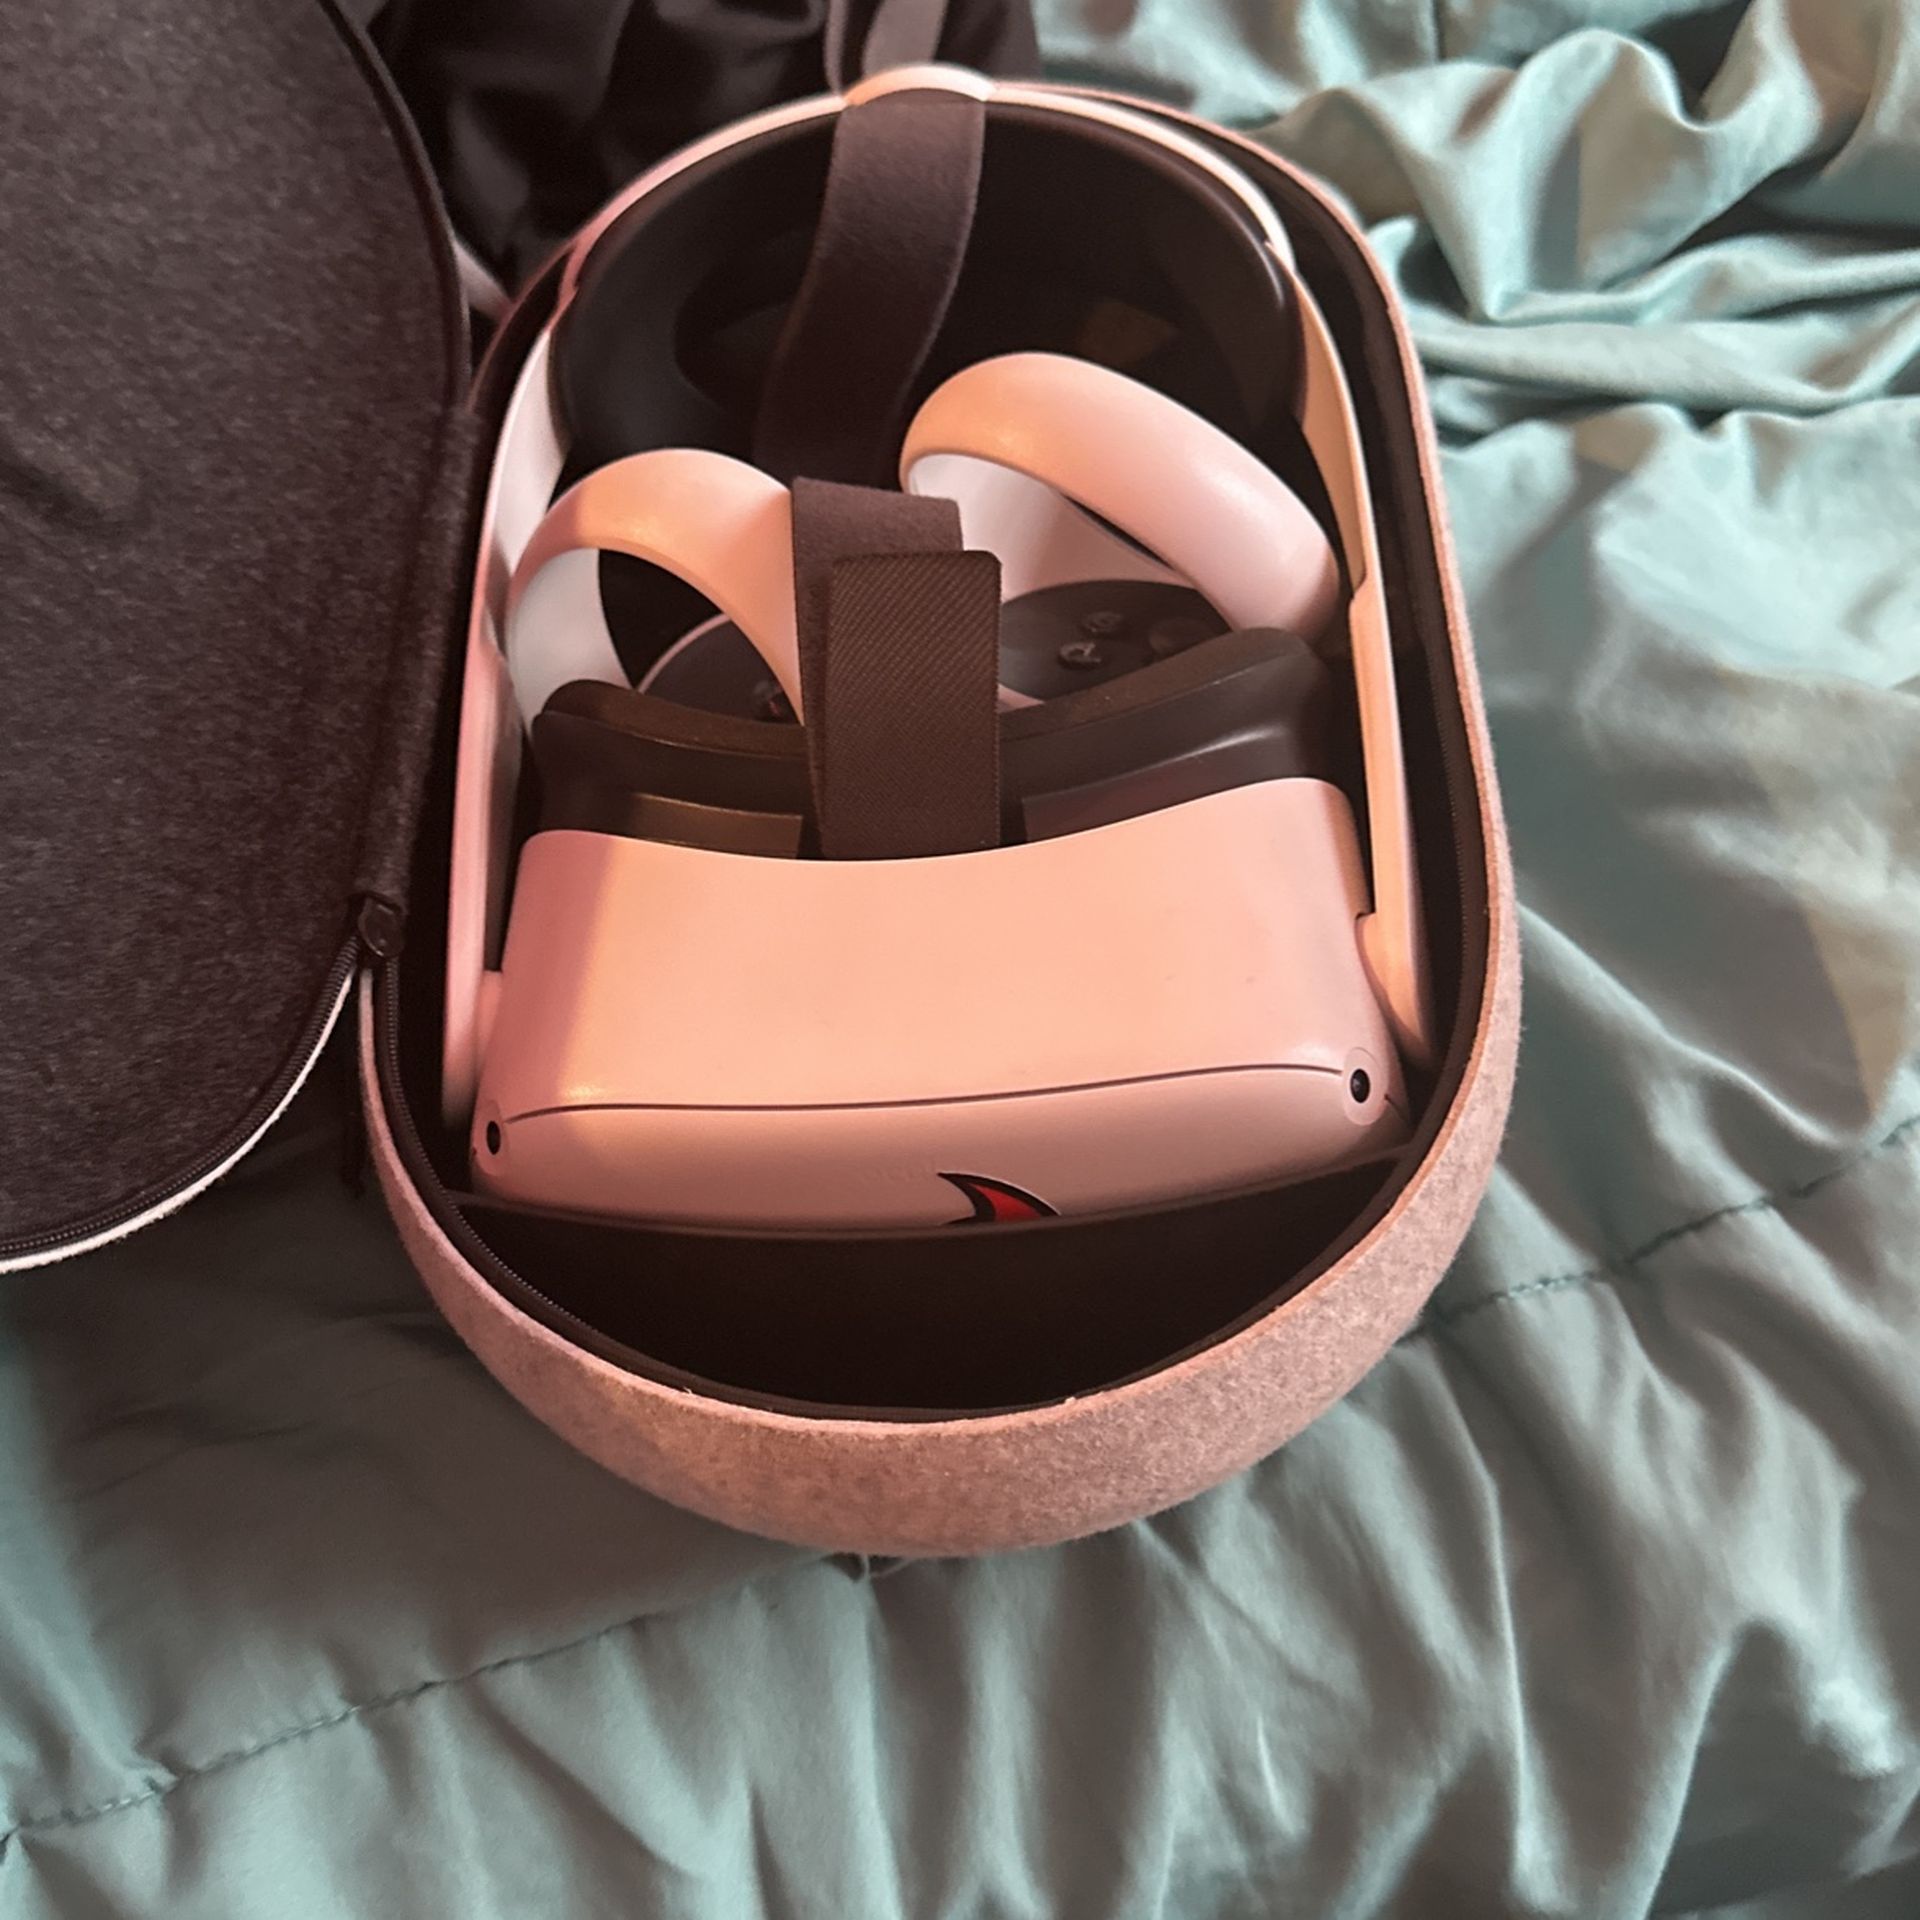 PERFECT Condition 2023 Oculus Quest 2